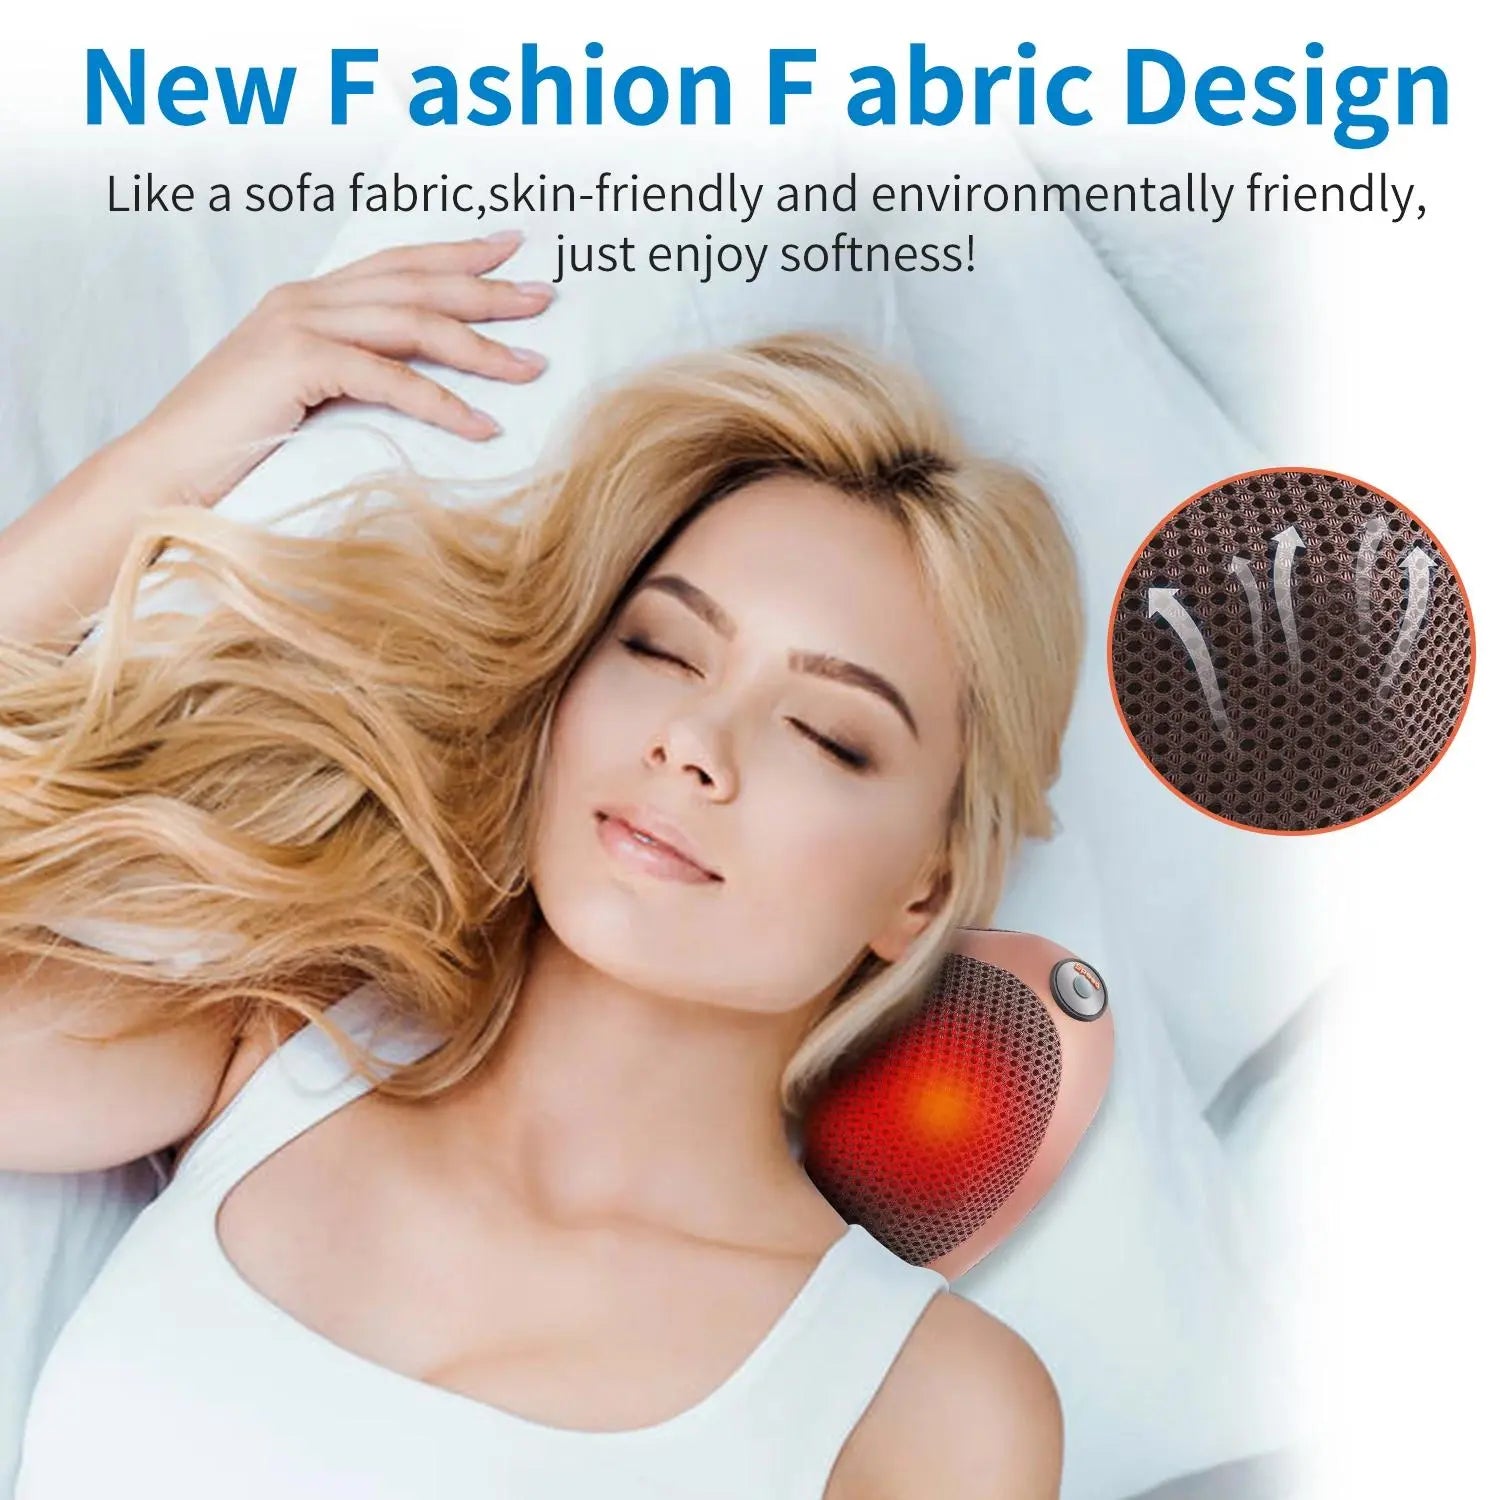 Electric Massage Pillow - Shiatsu heating kneading, dual-speed technology for head, neck, and body. Portable, rechargeable, and versatile. Say goodbye to stress and tension.